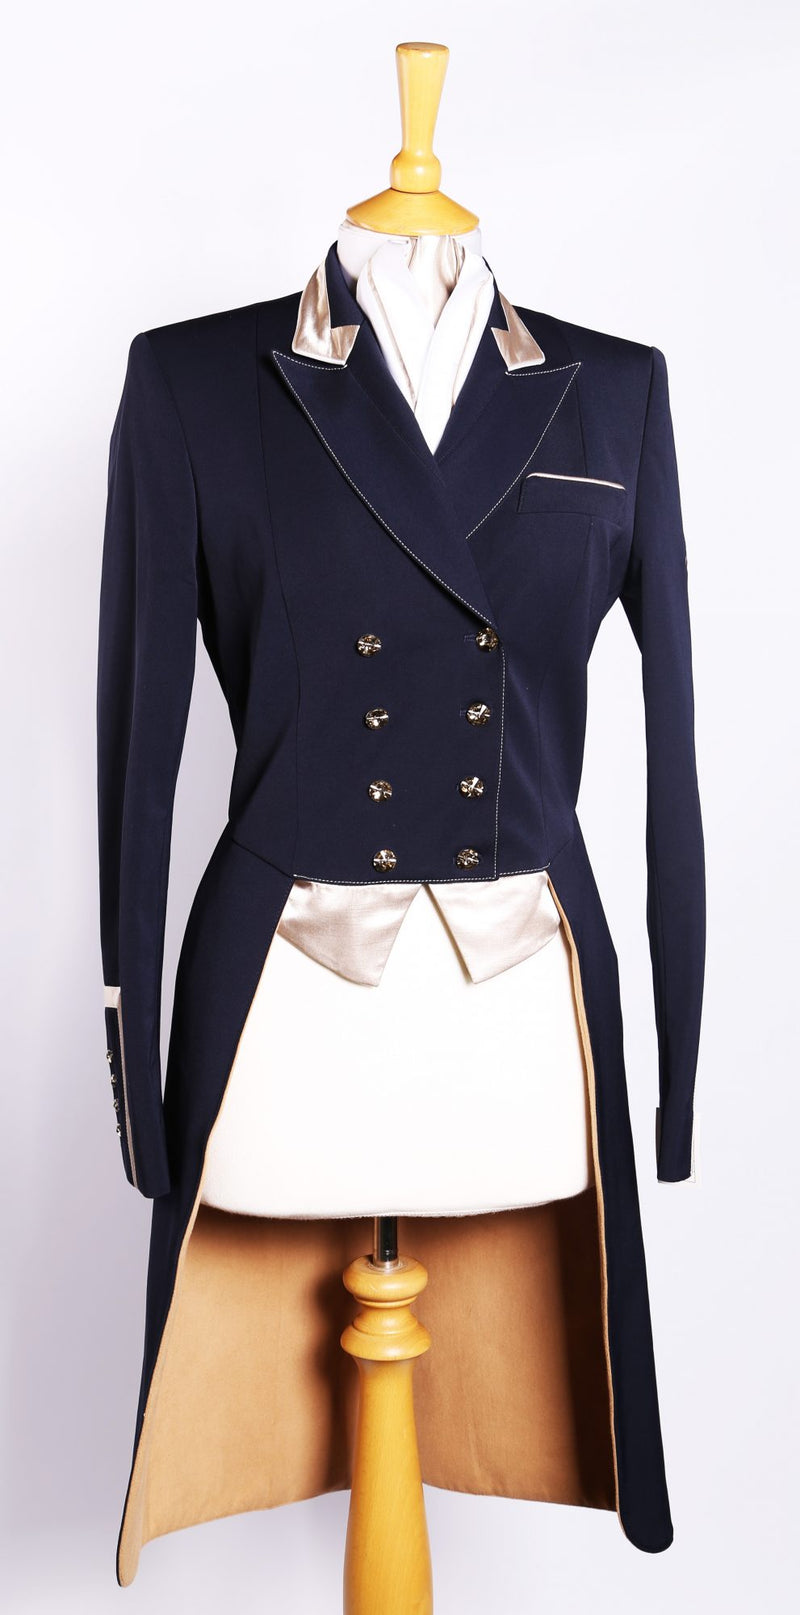 Ladies Isabell Dressage Tailcoat, Navy & Champagne